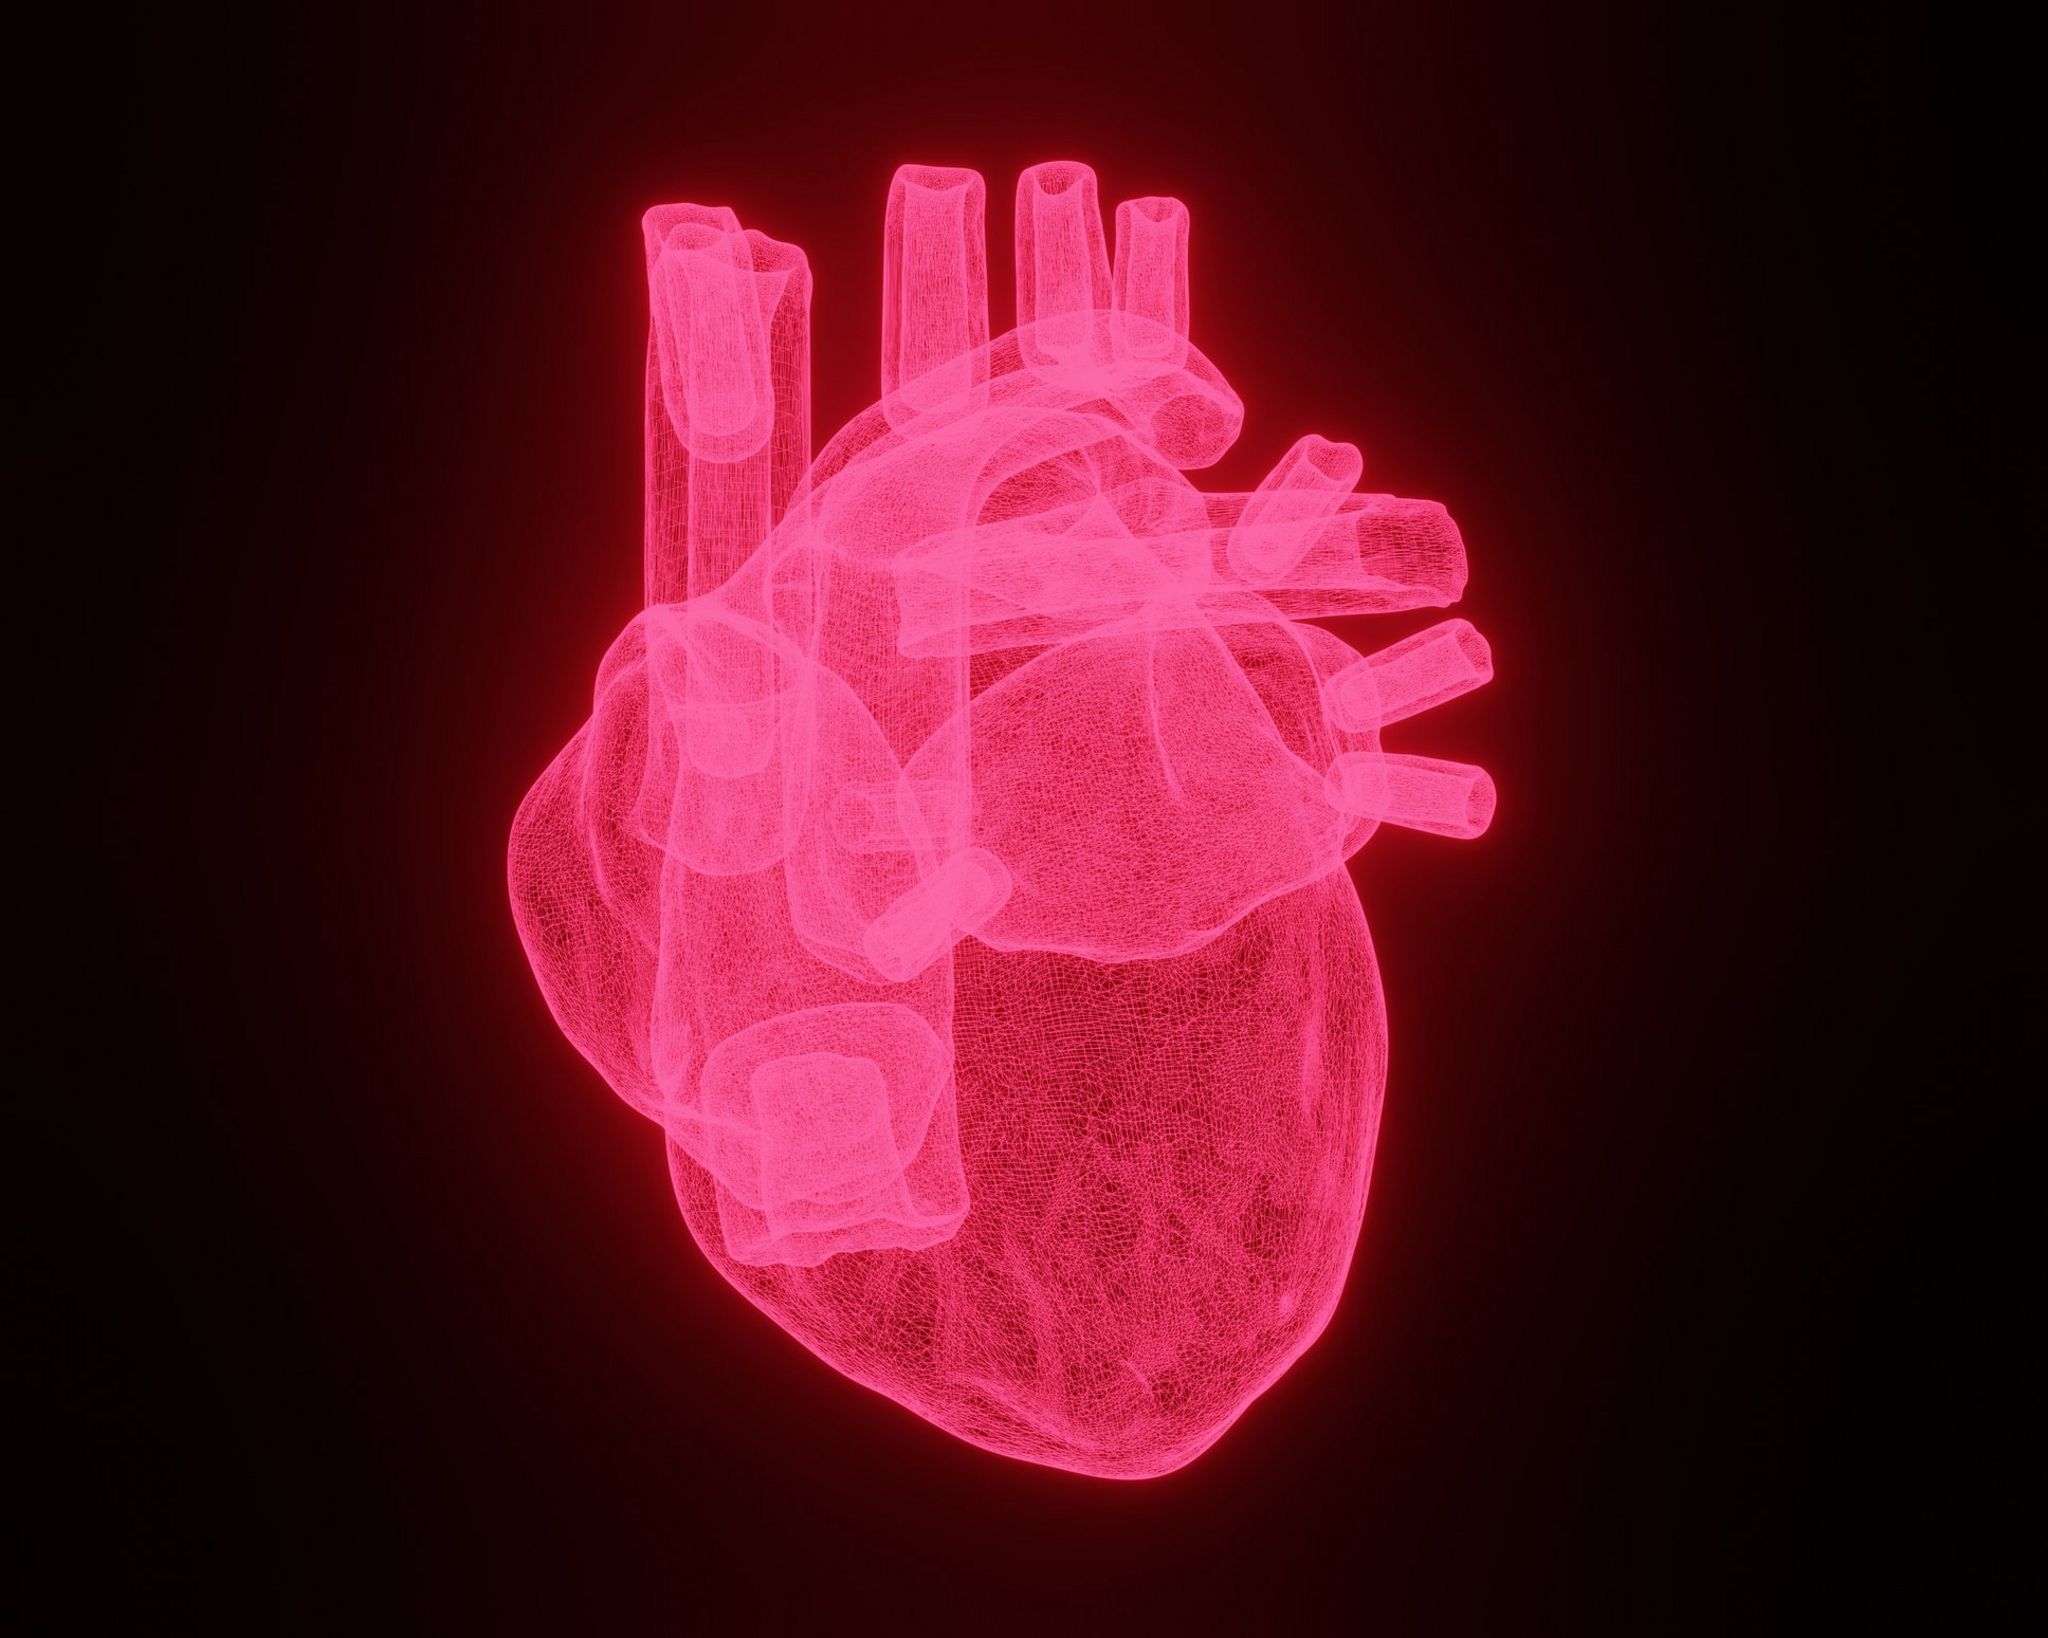 A 3D illustration of the human heart